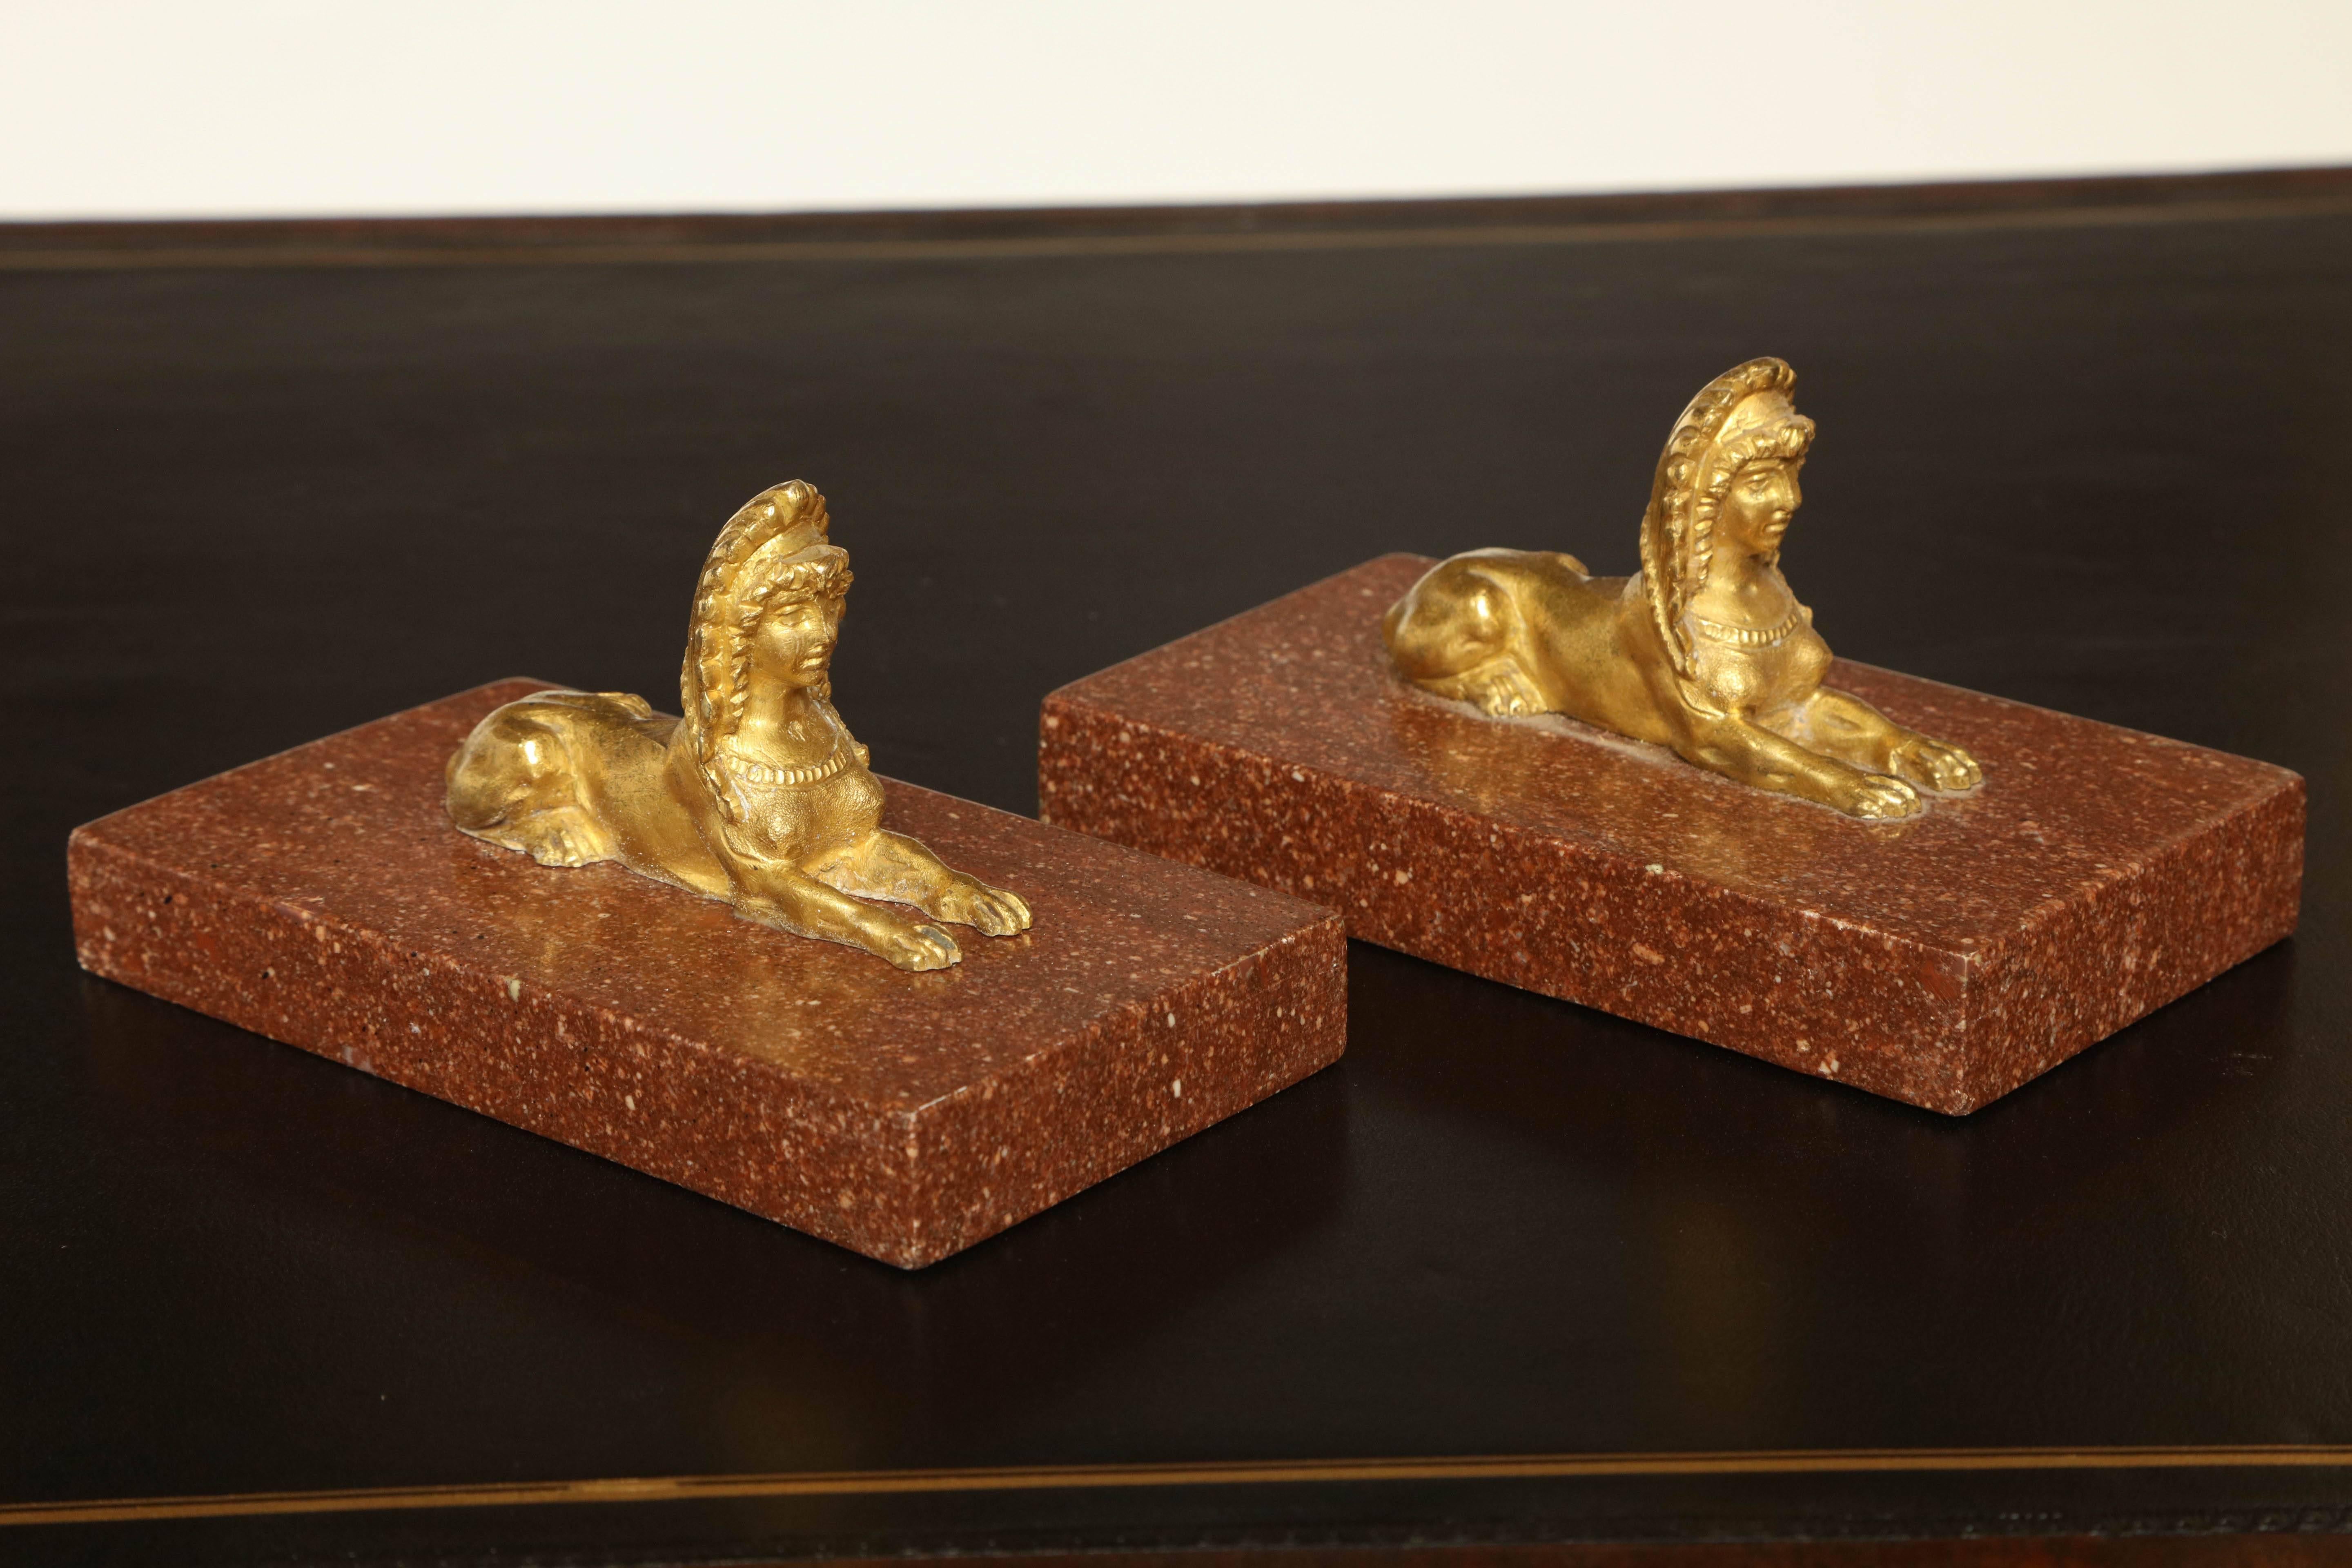 Pair of gilded bronze sphinx on porphyry bases.